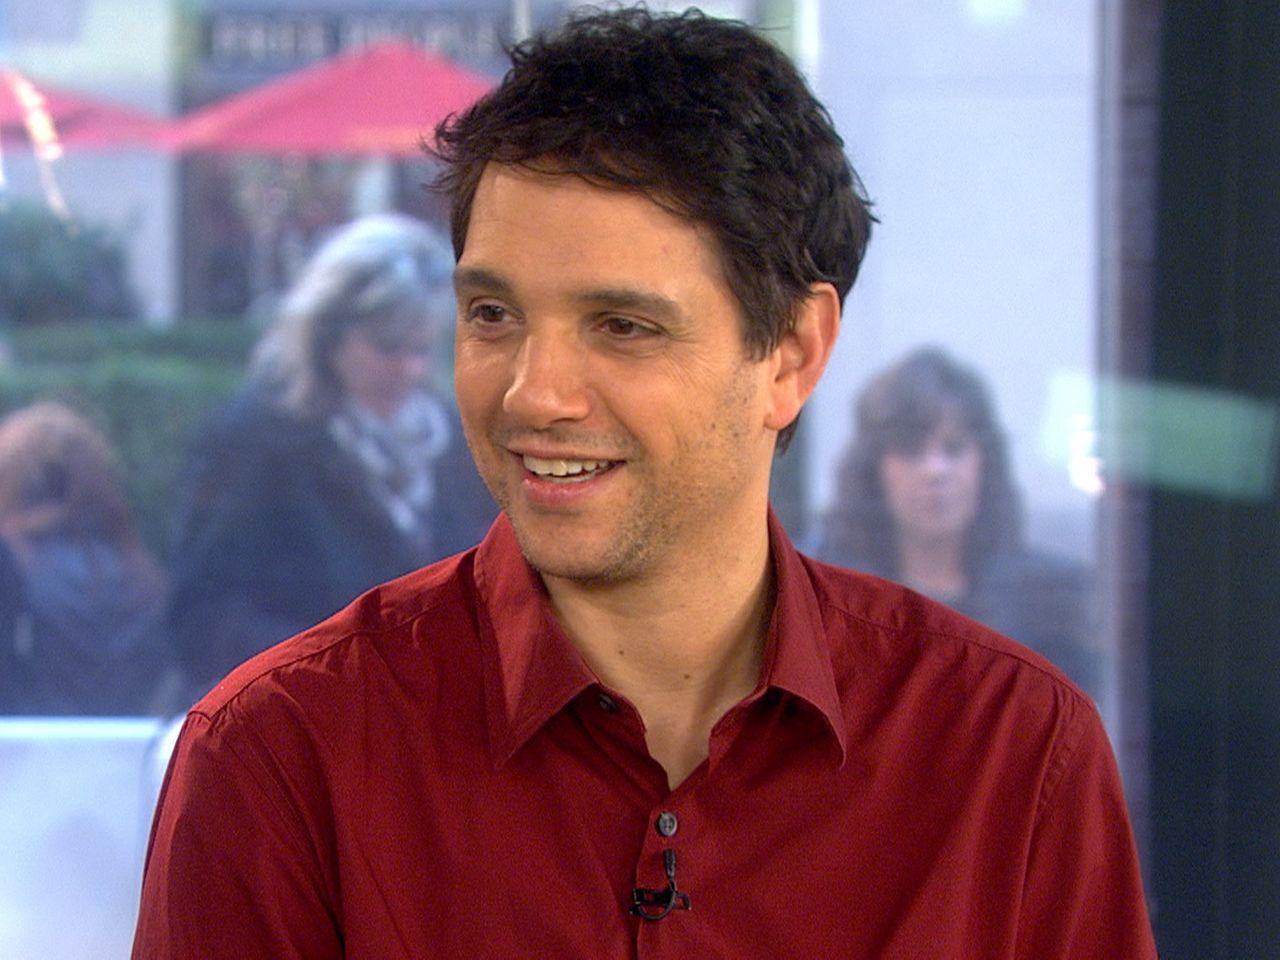 Yes, Ralph Macchio is really 51 years old